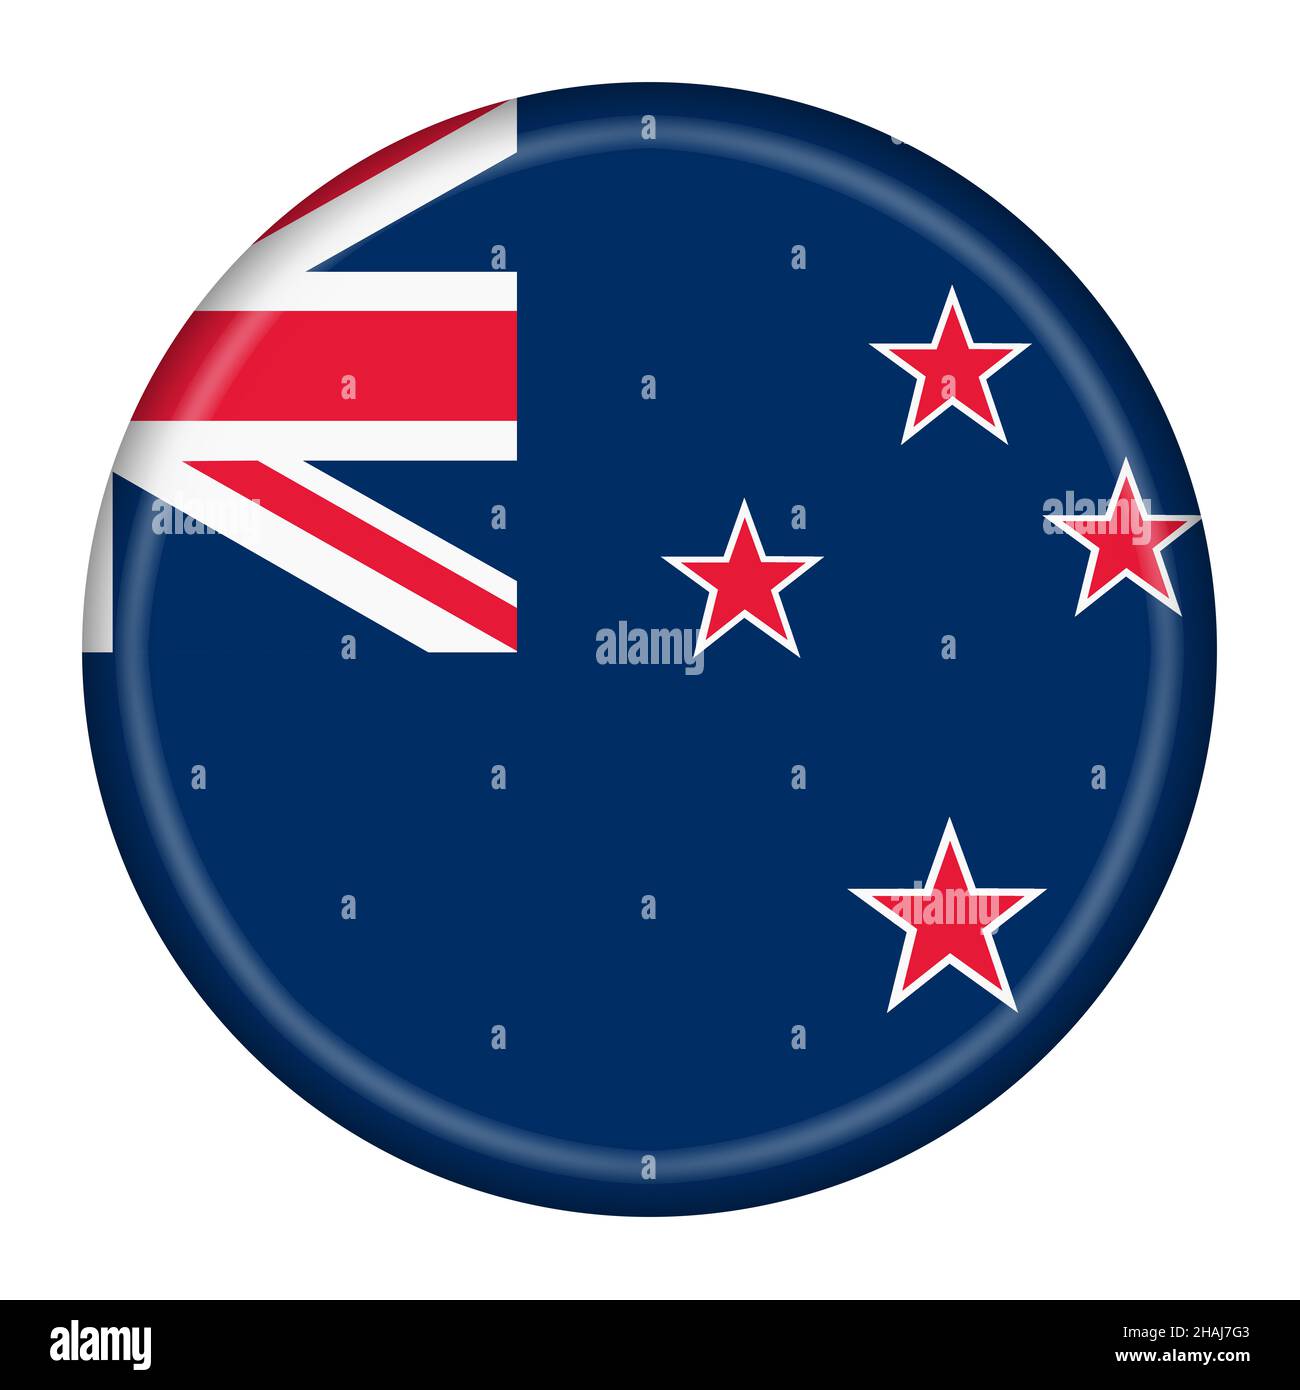 New Zealand flag button 3d illustration with clipping path Stock Photo